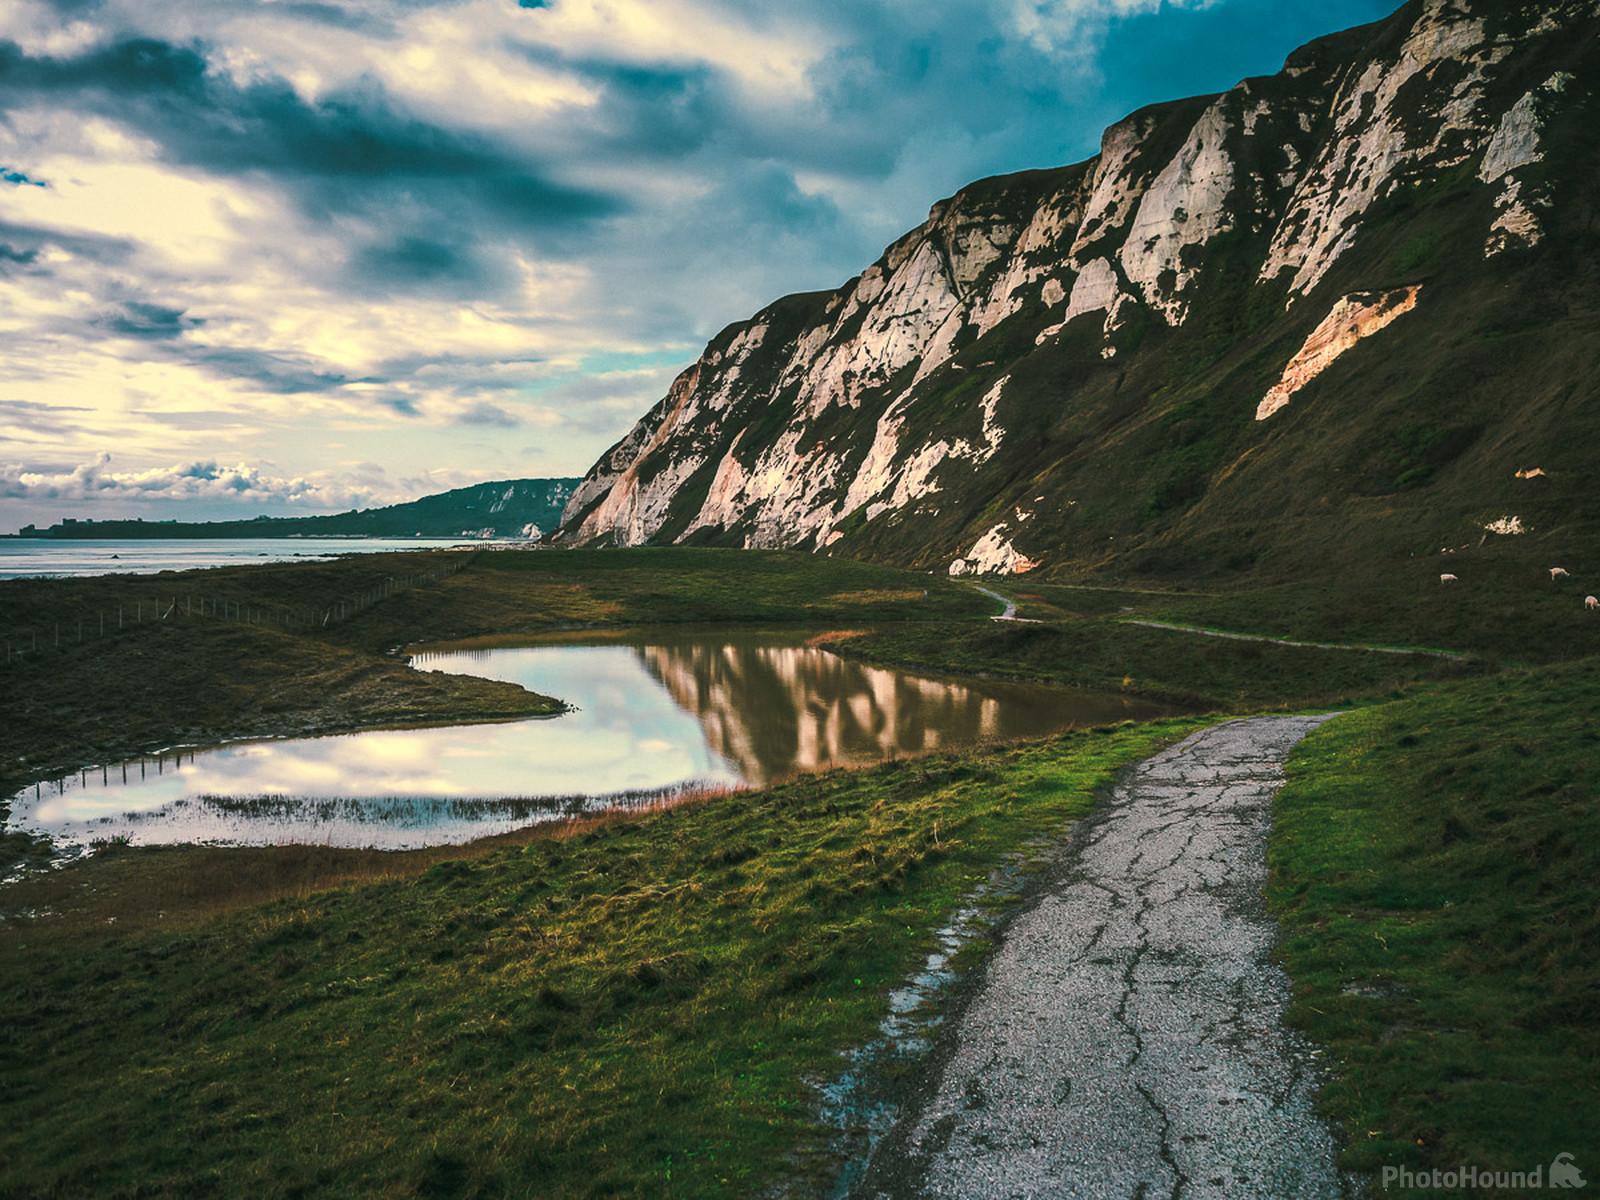 Image of White Cliffs at Samphire Hoe by Jo Whitnell